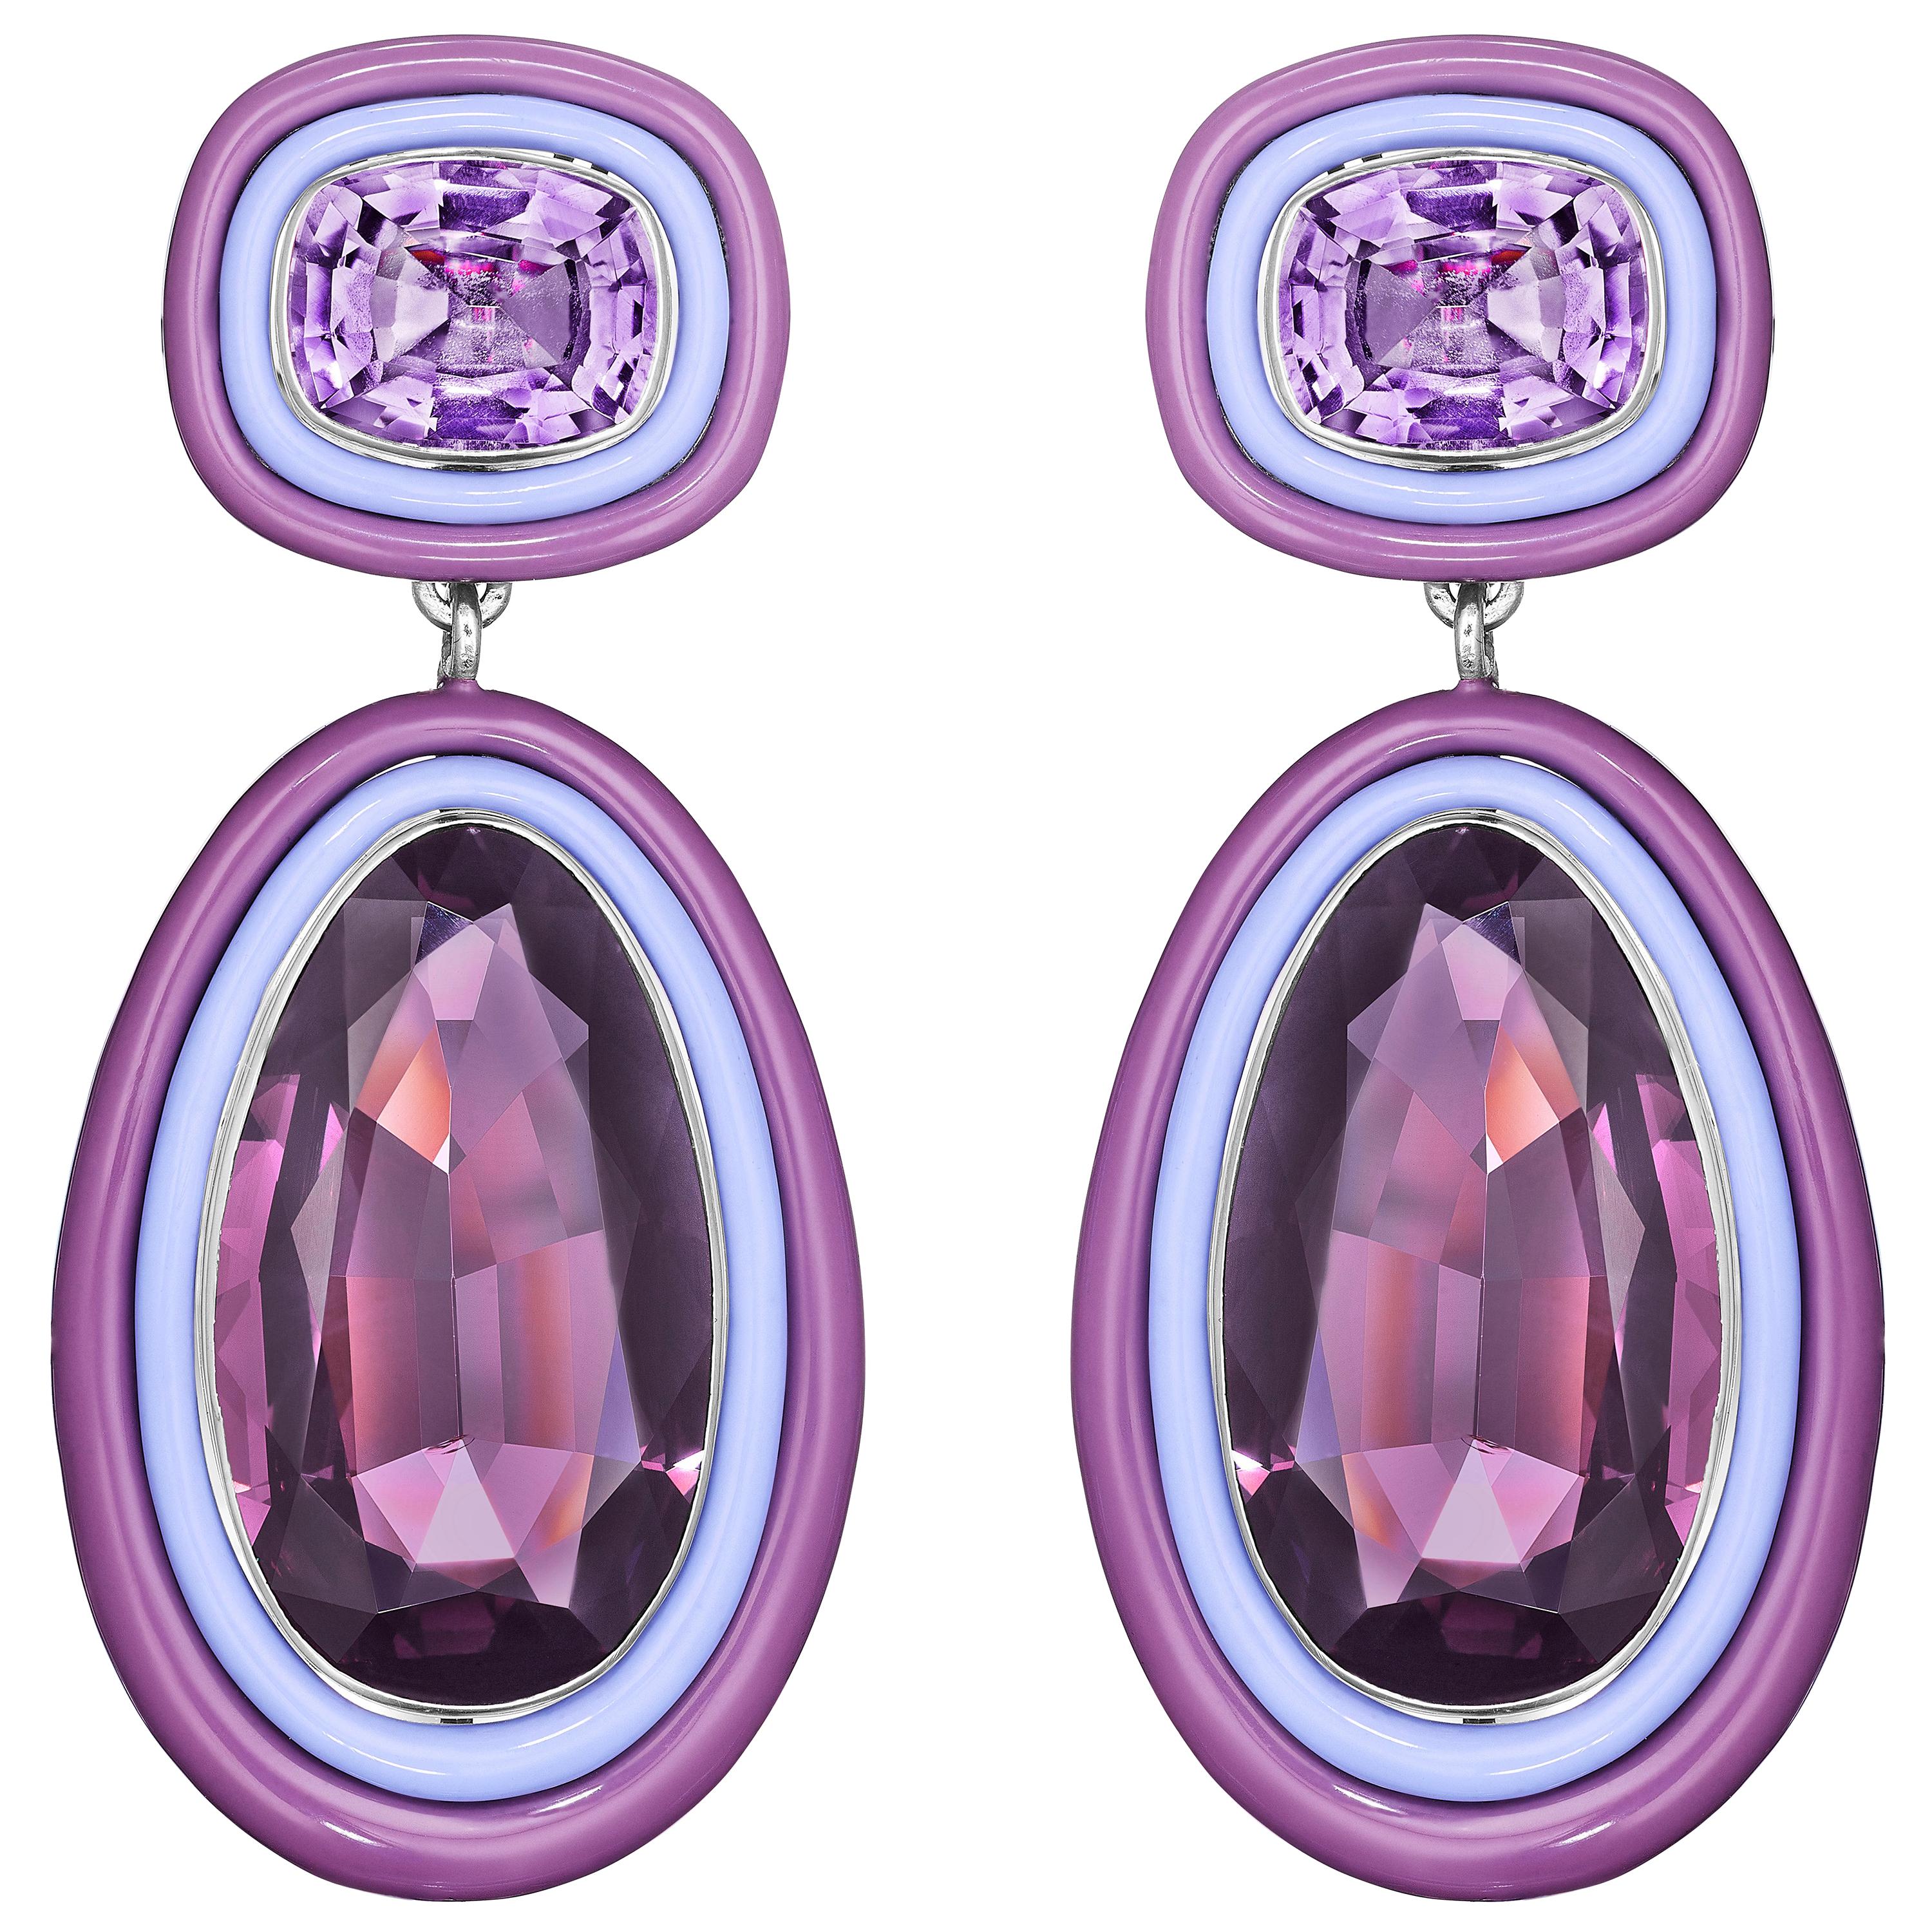 Siegelson Spinel and Amethyst White Gold Purple Chroma Ear Clip Earrings For Sale